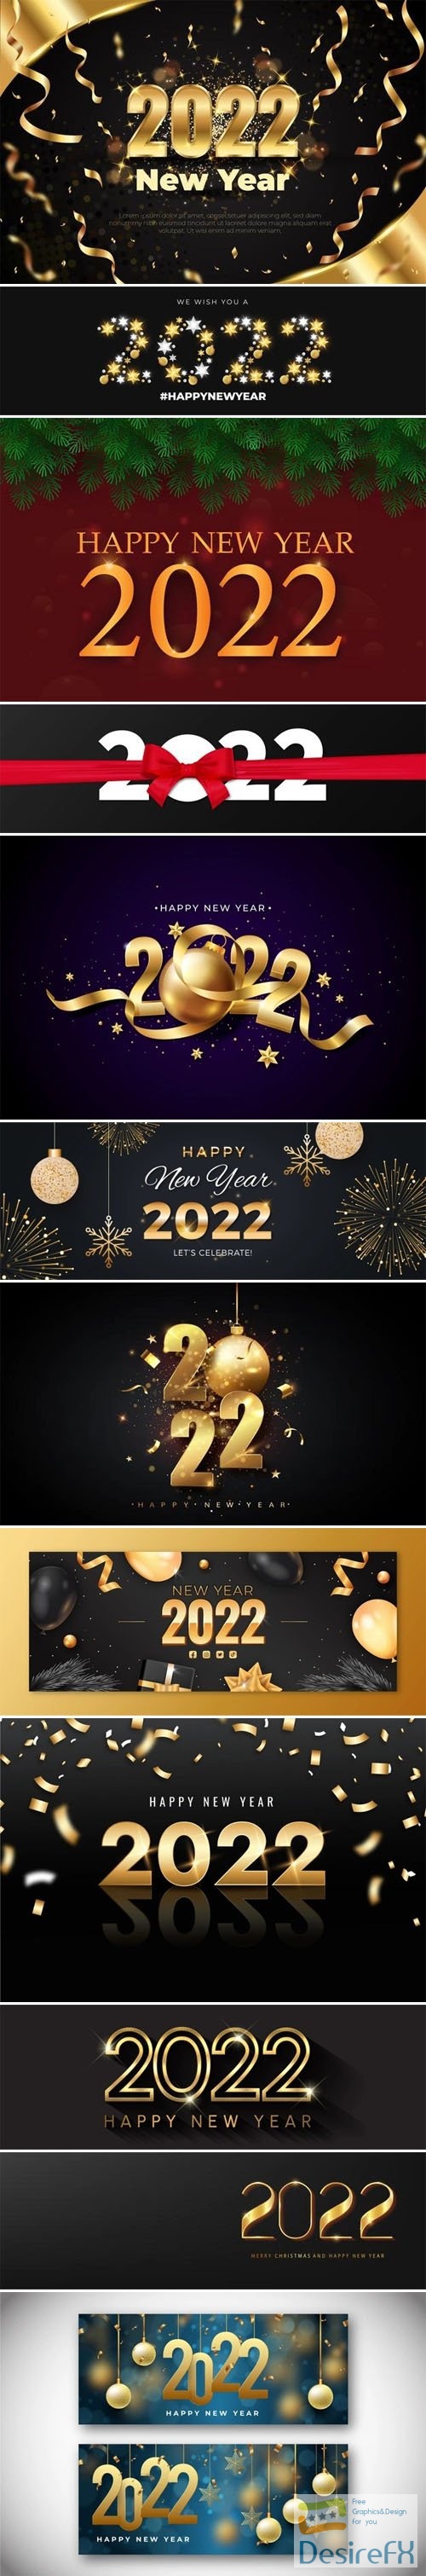 Happy New Year 2022 Banners &amp; Backgrounds Collection Vol.3 - 10+ Vector Templates